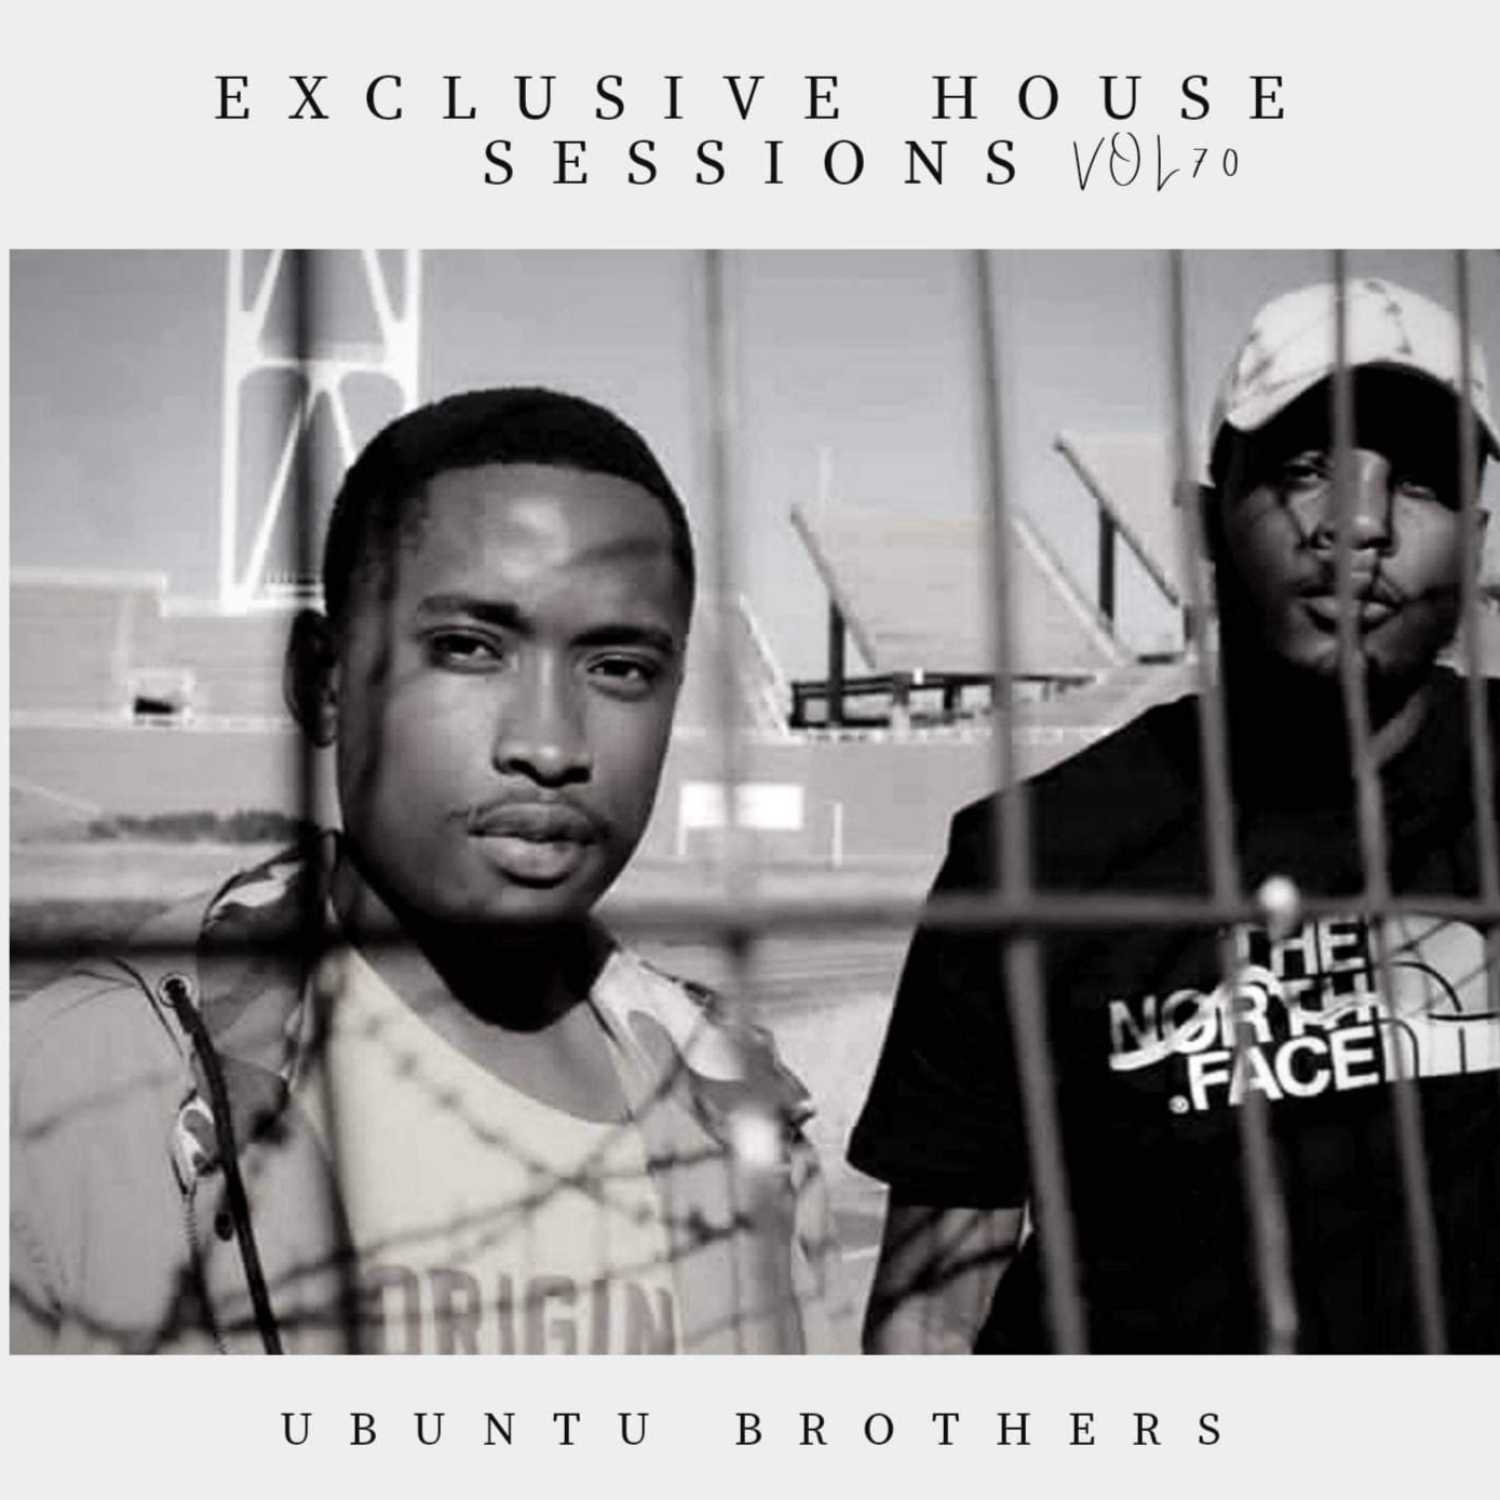 Exclusive House Sessions Vol.70 Guest Mix by Ubuntu Brothers